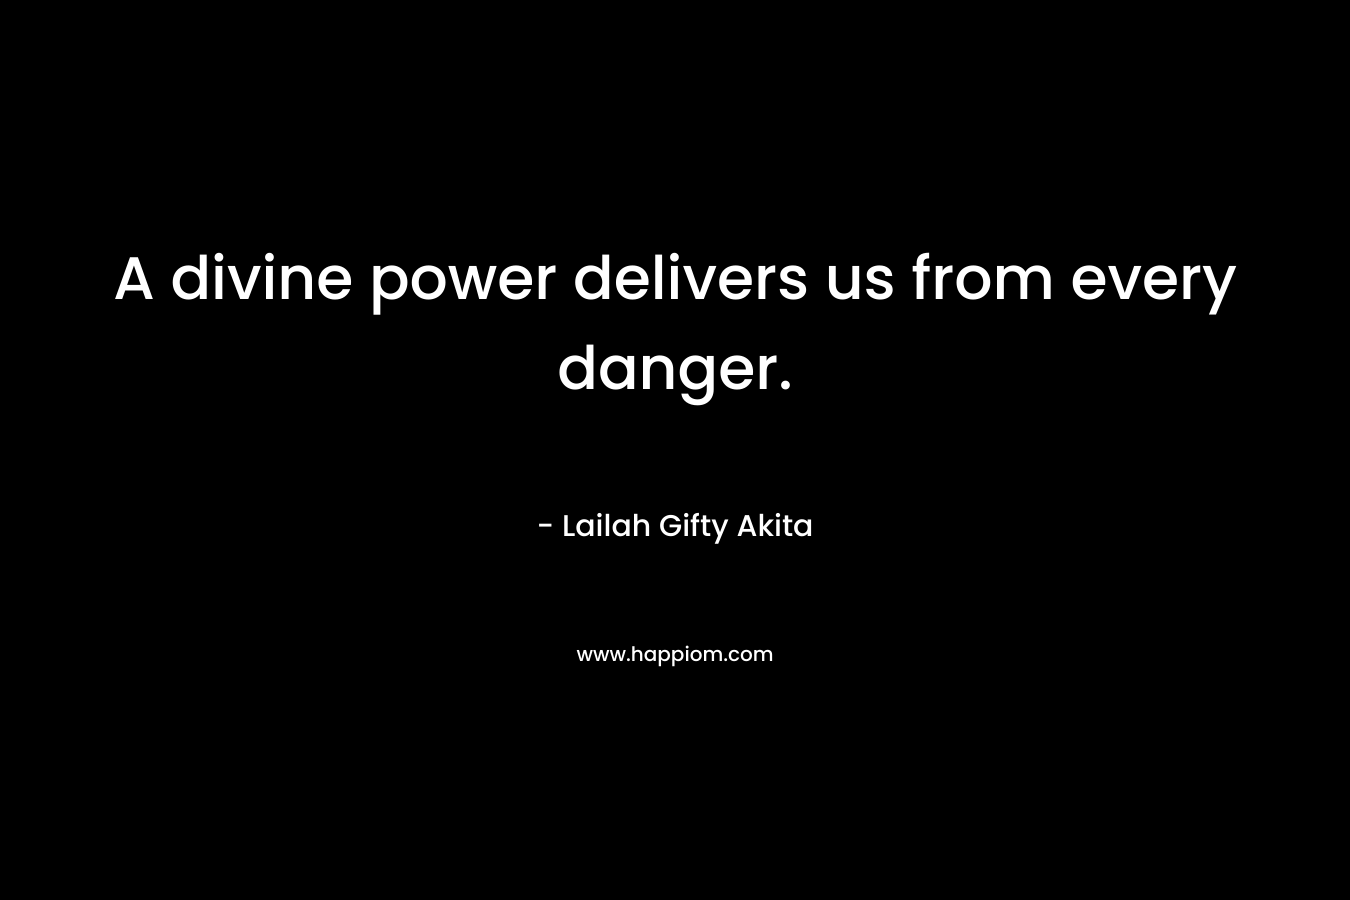 A divine power delivers us from every danger. – Lailah Gifty Akita